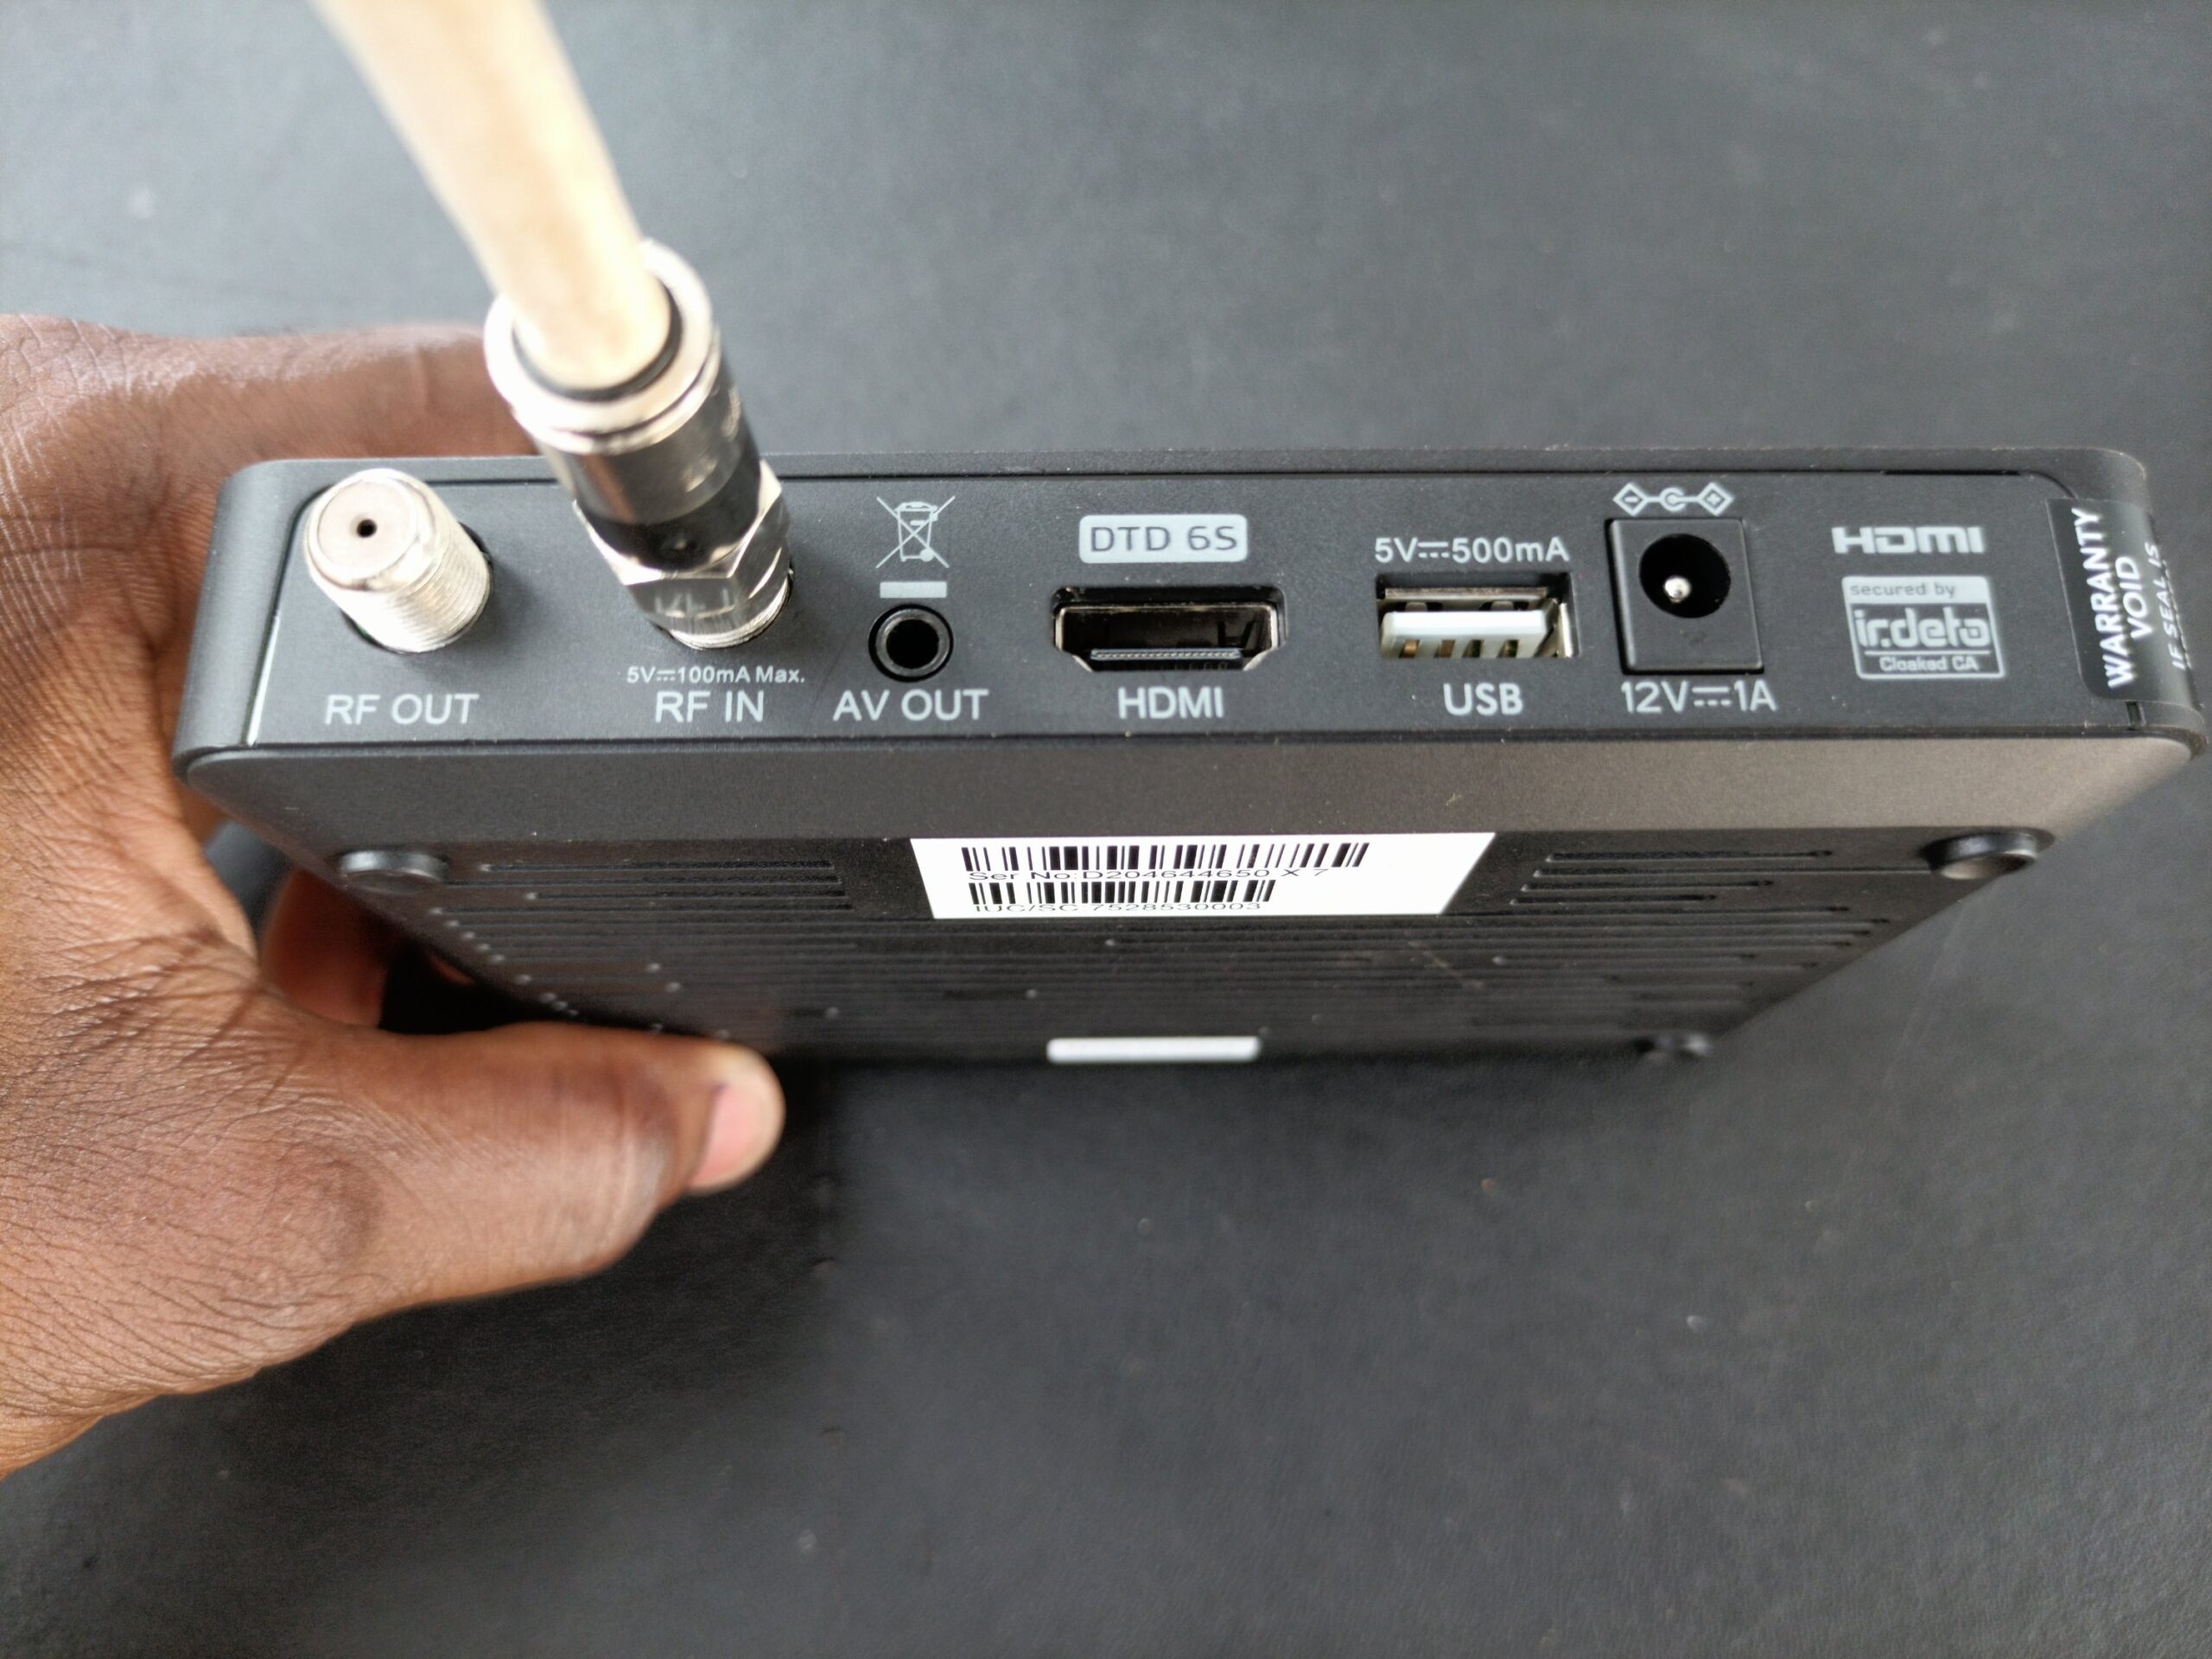 Antenna cable (Coaxial cable) to Gotv decoder Connection